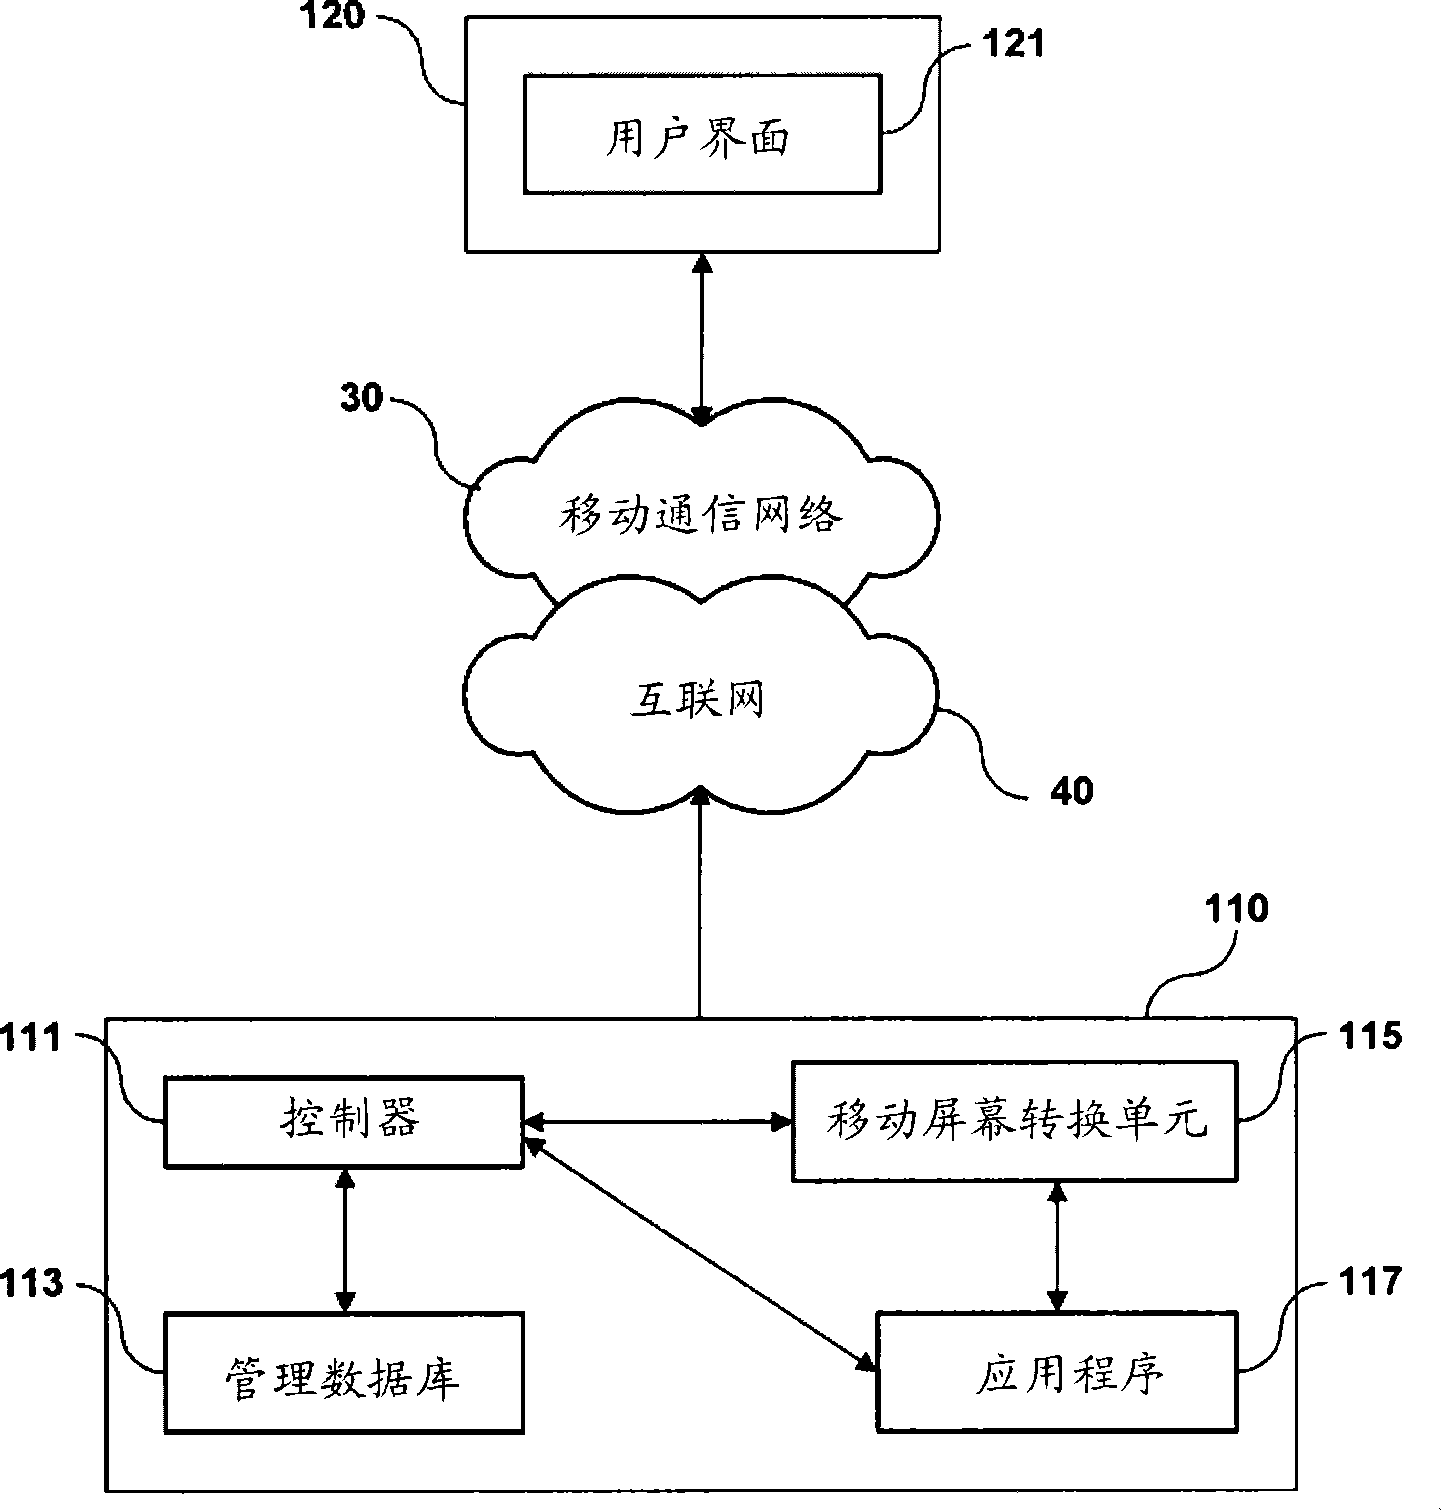 Control method for controlling remote computer